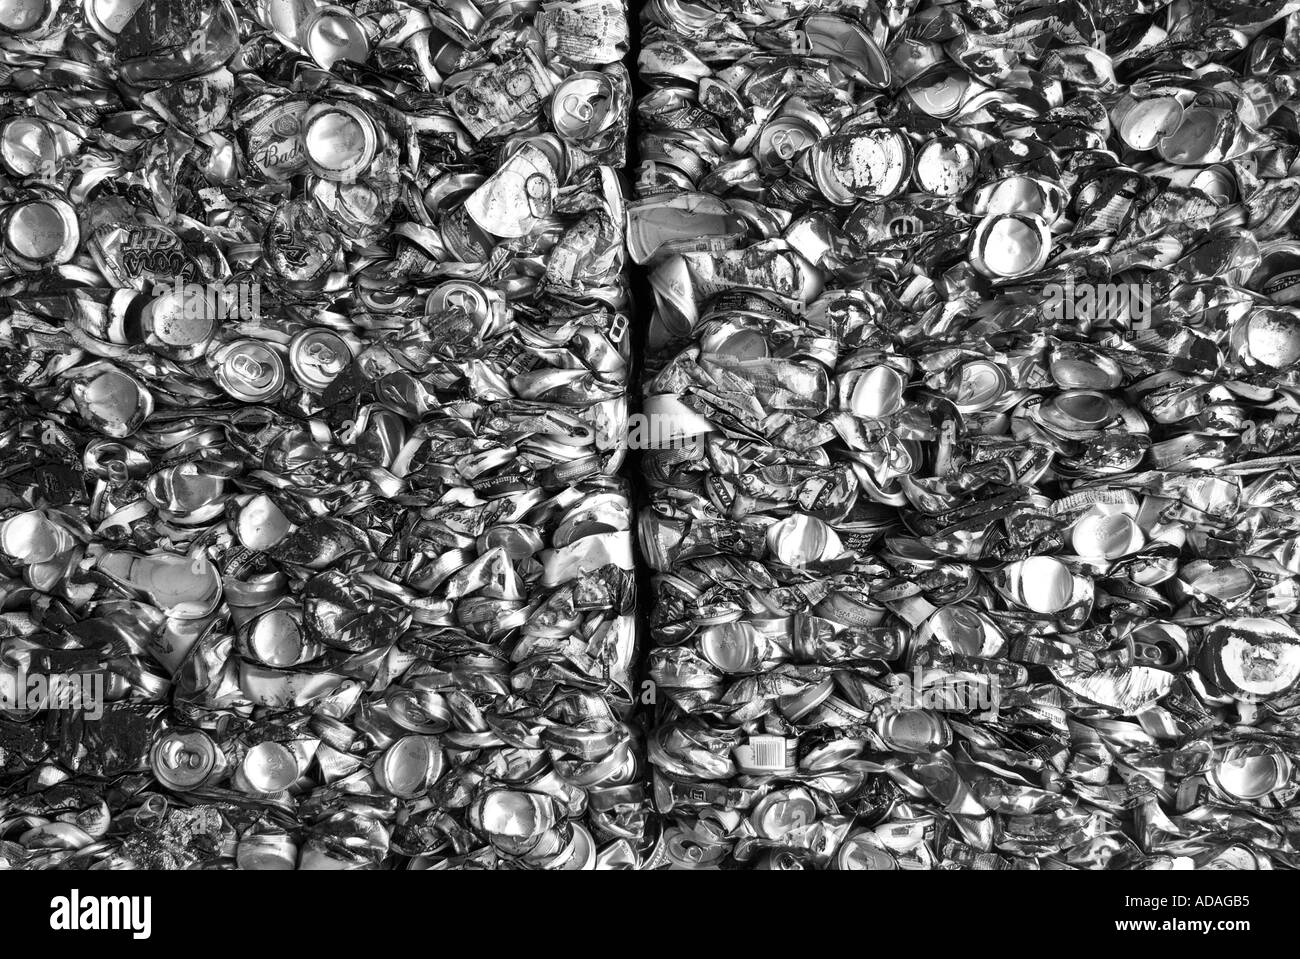 Crushed aluminum cans at a recycling enter Stock Photo